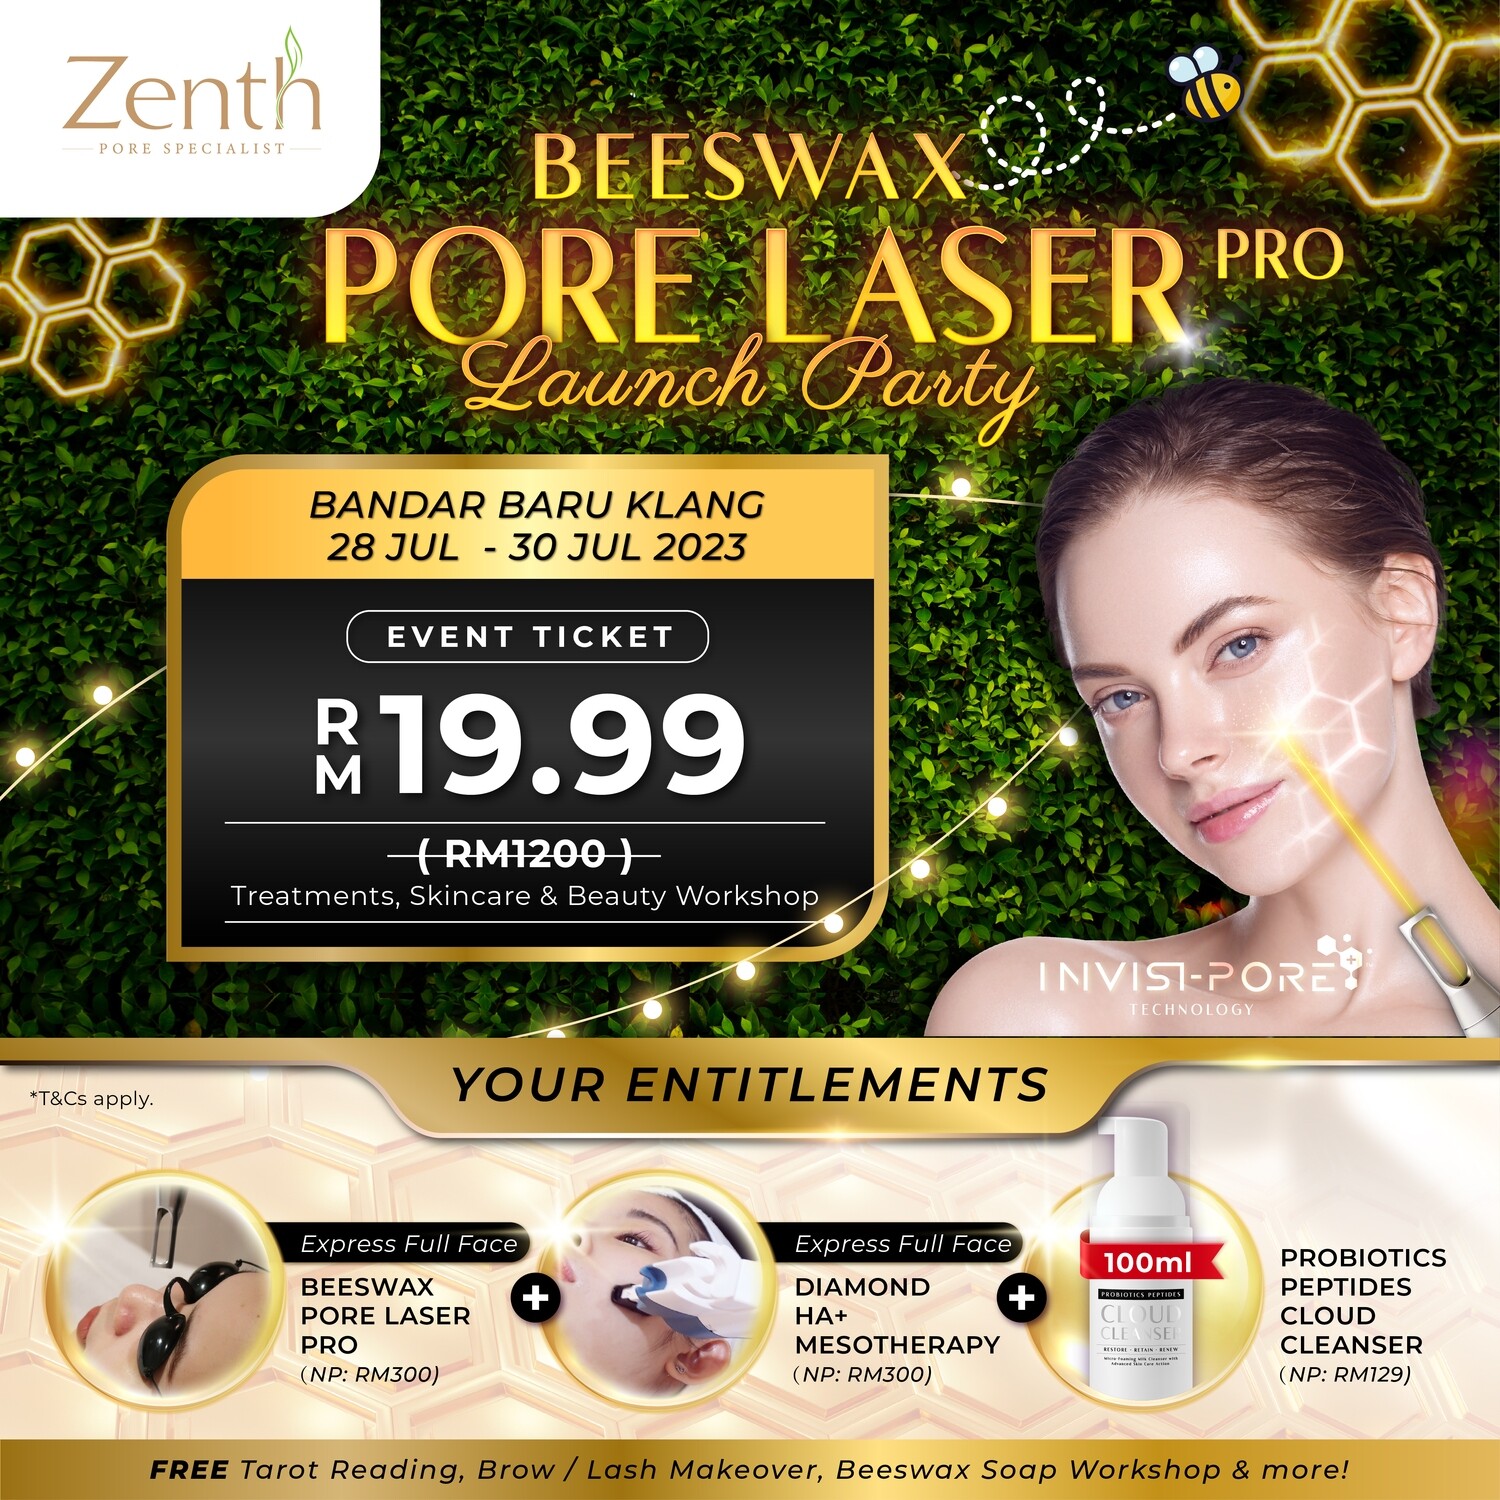 (NEW LAUNCH PARTY) Beeswax Pore Laser PRO